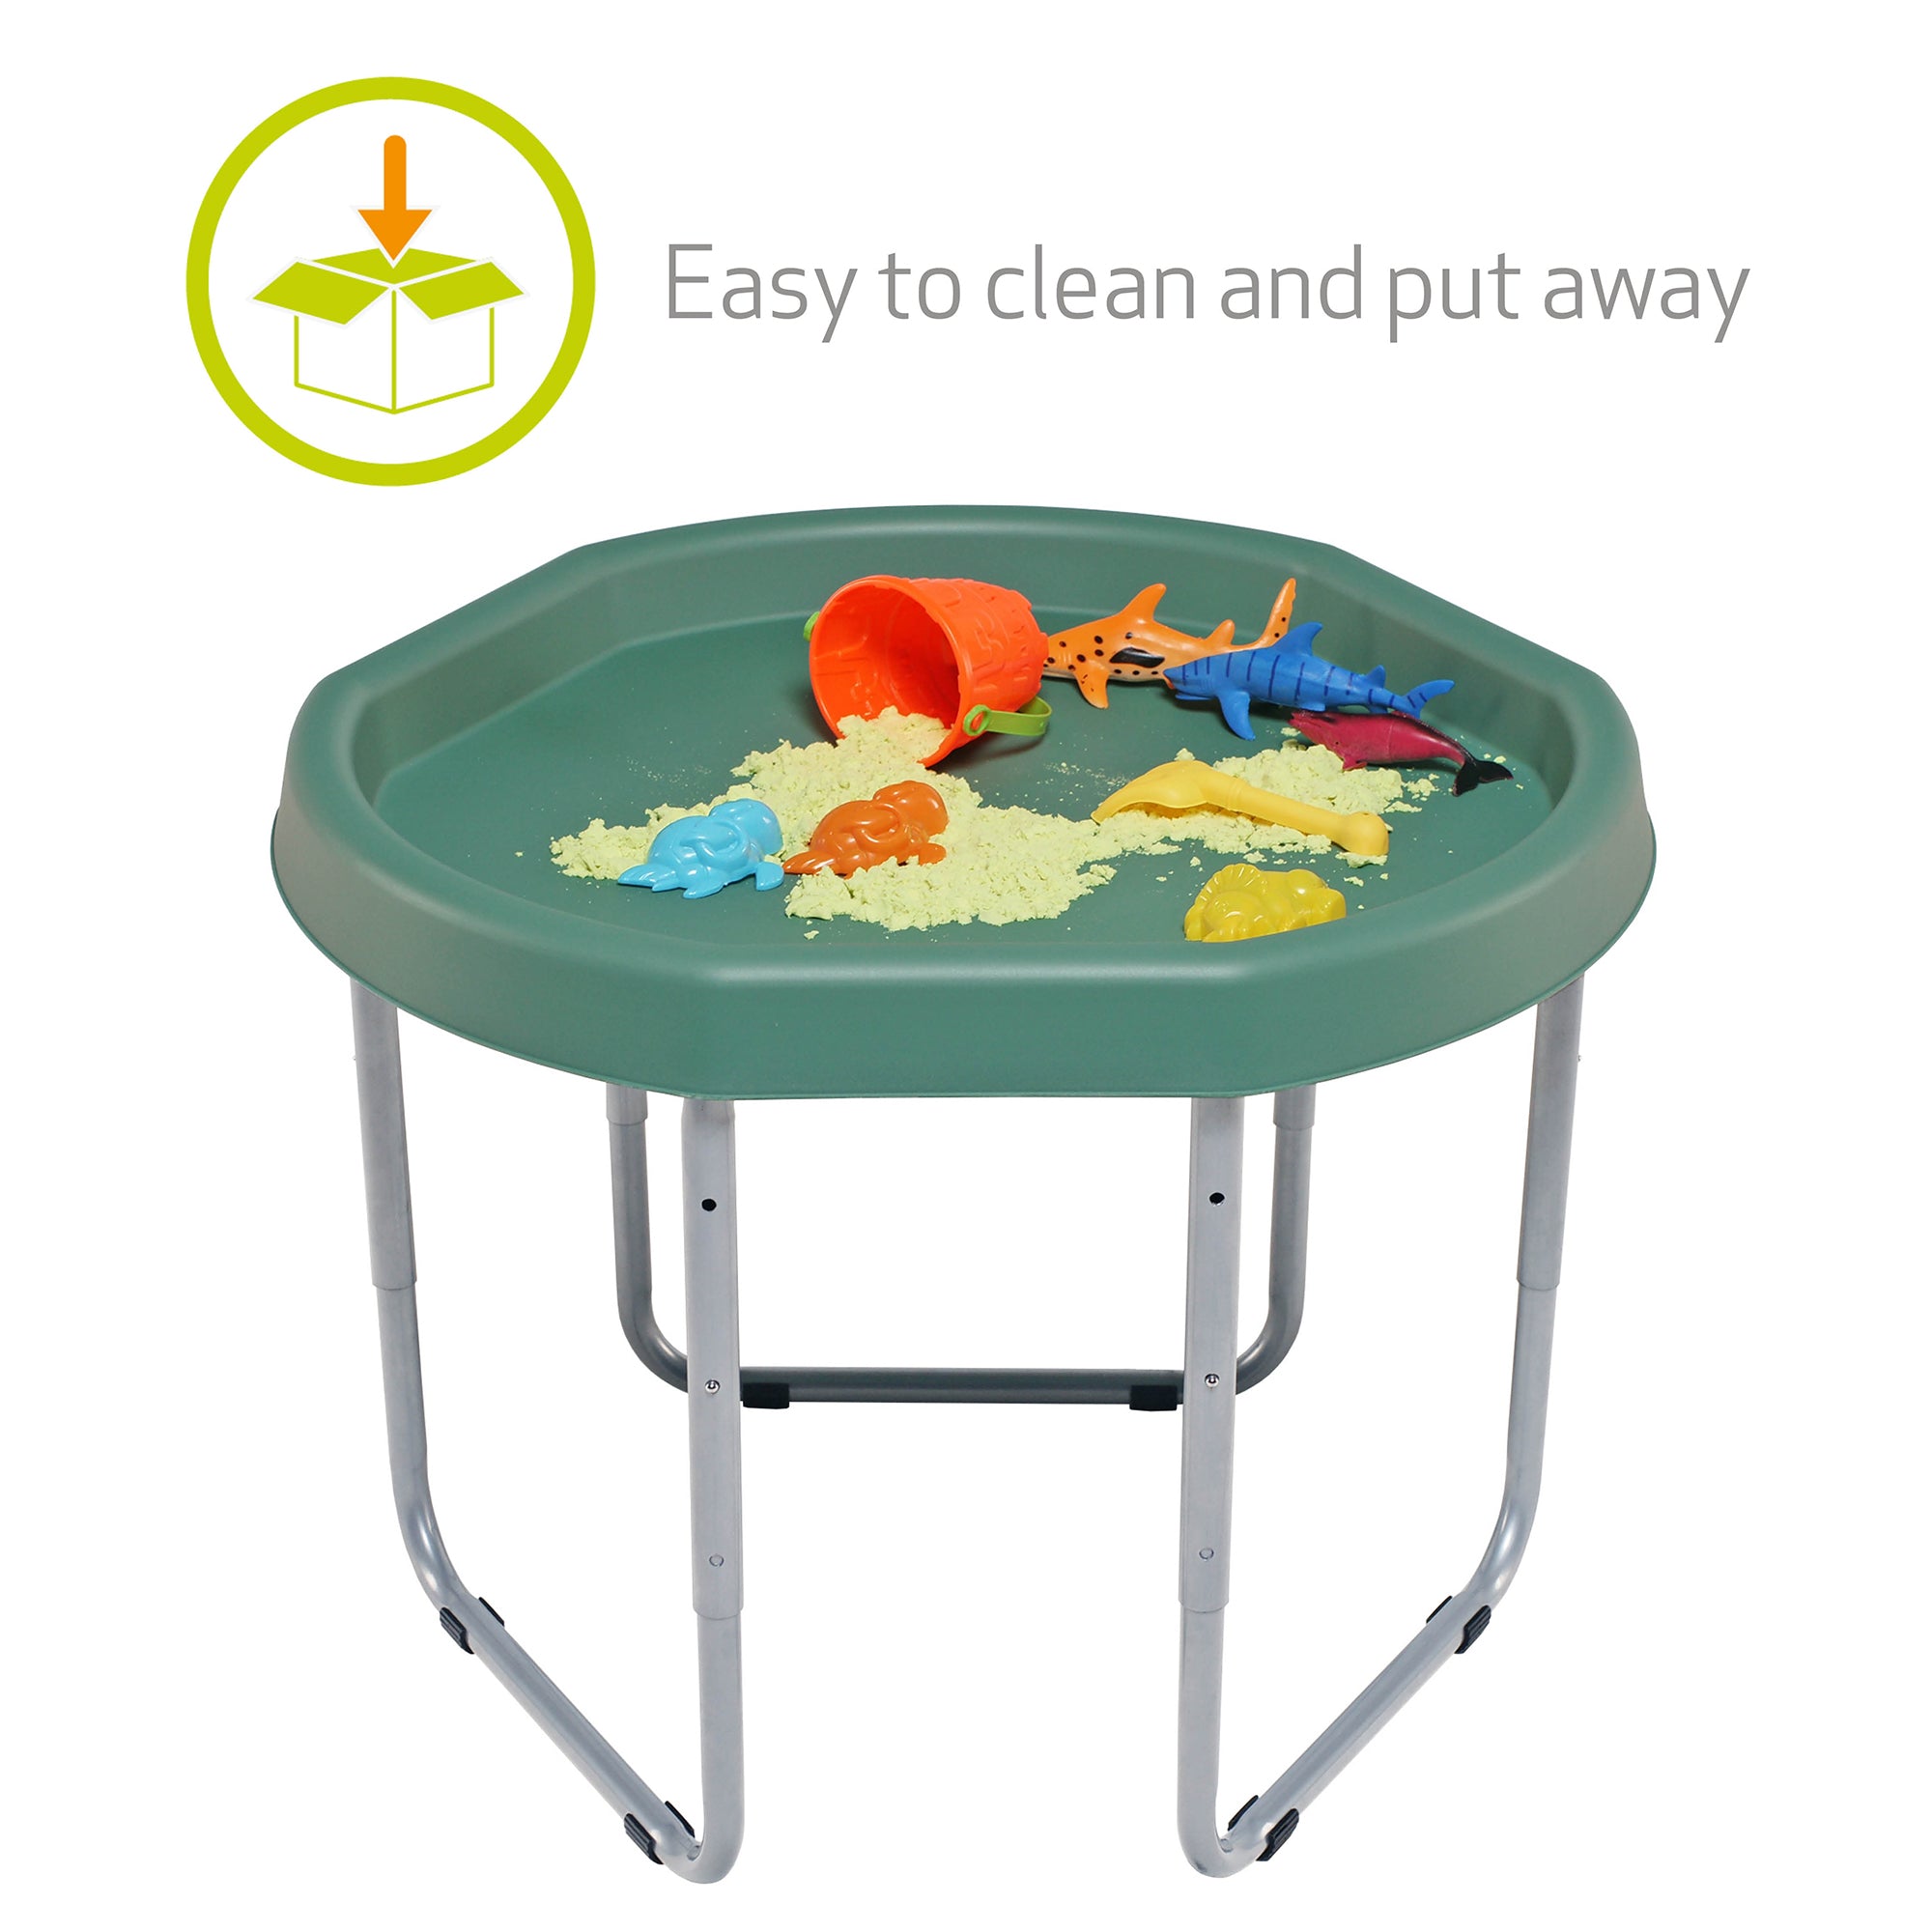 Original Hexacle Sensory Play Tuff Tray and Stand - 6 Colour Options